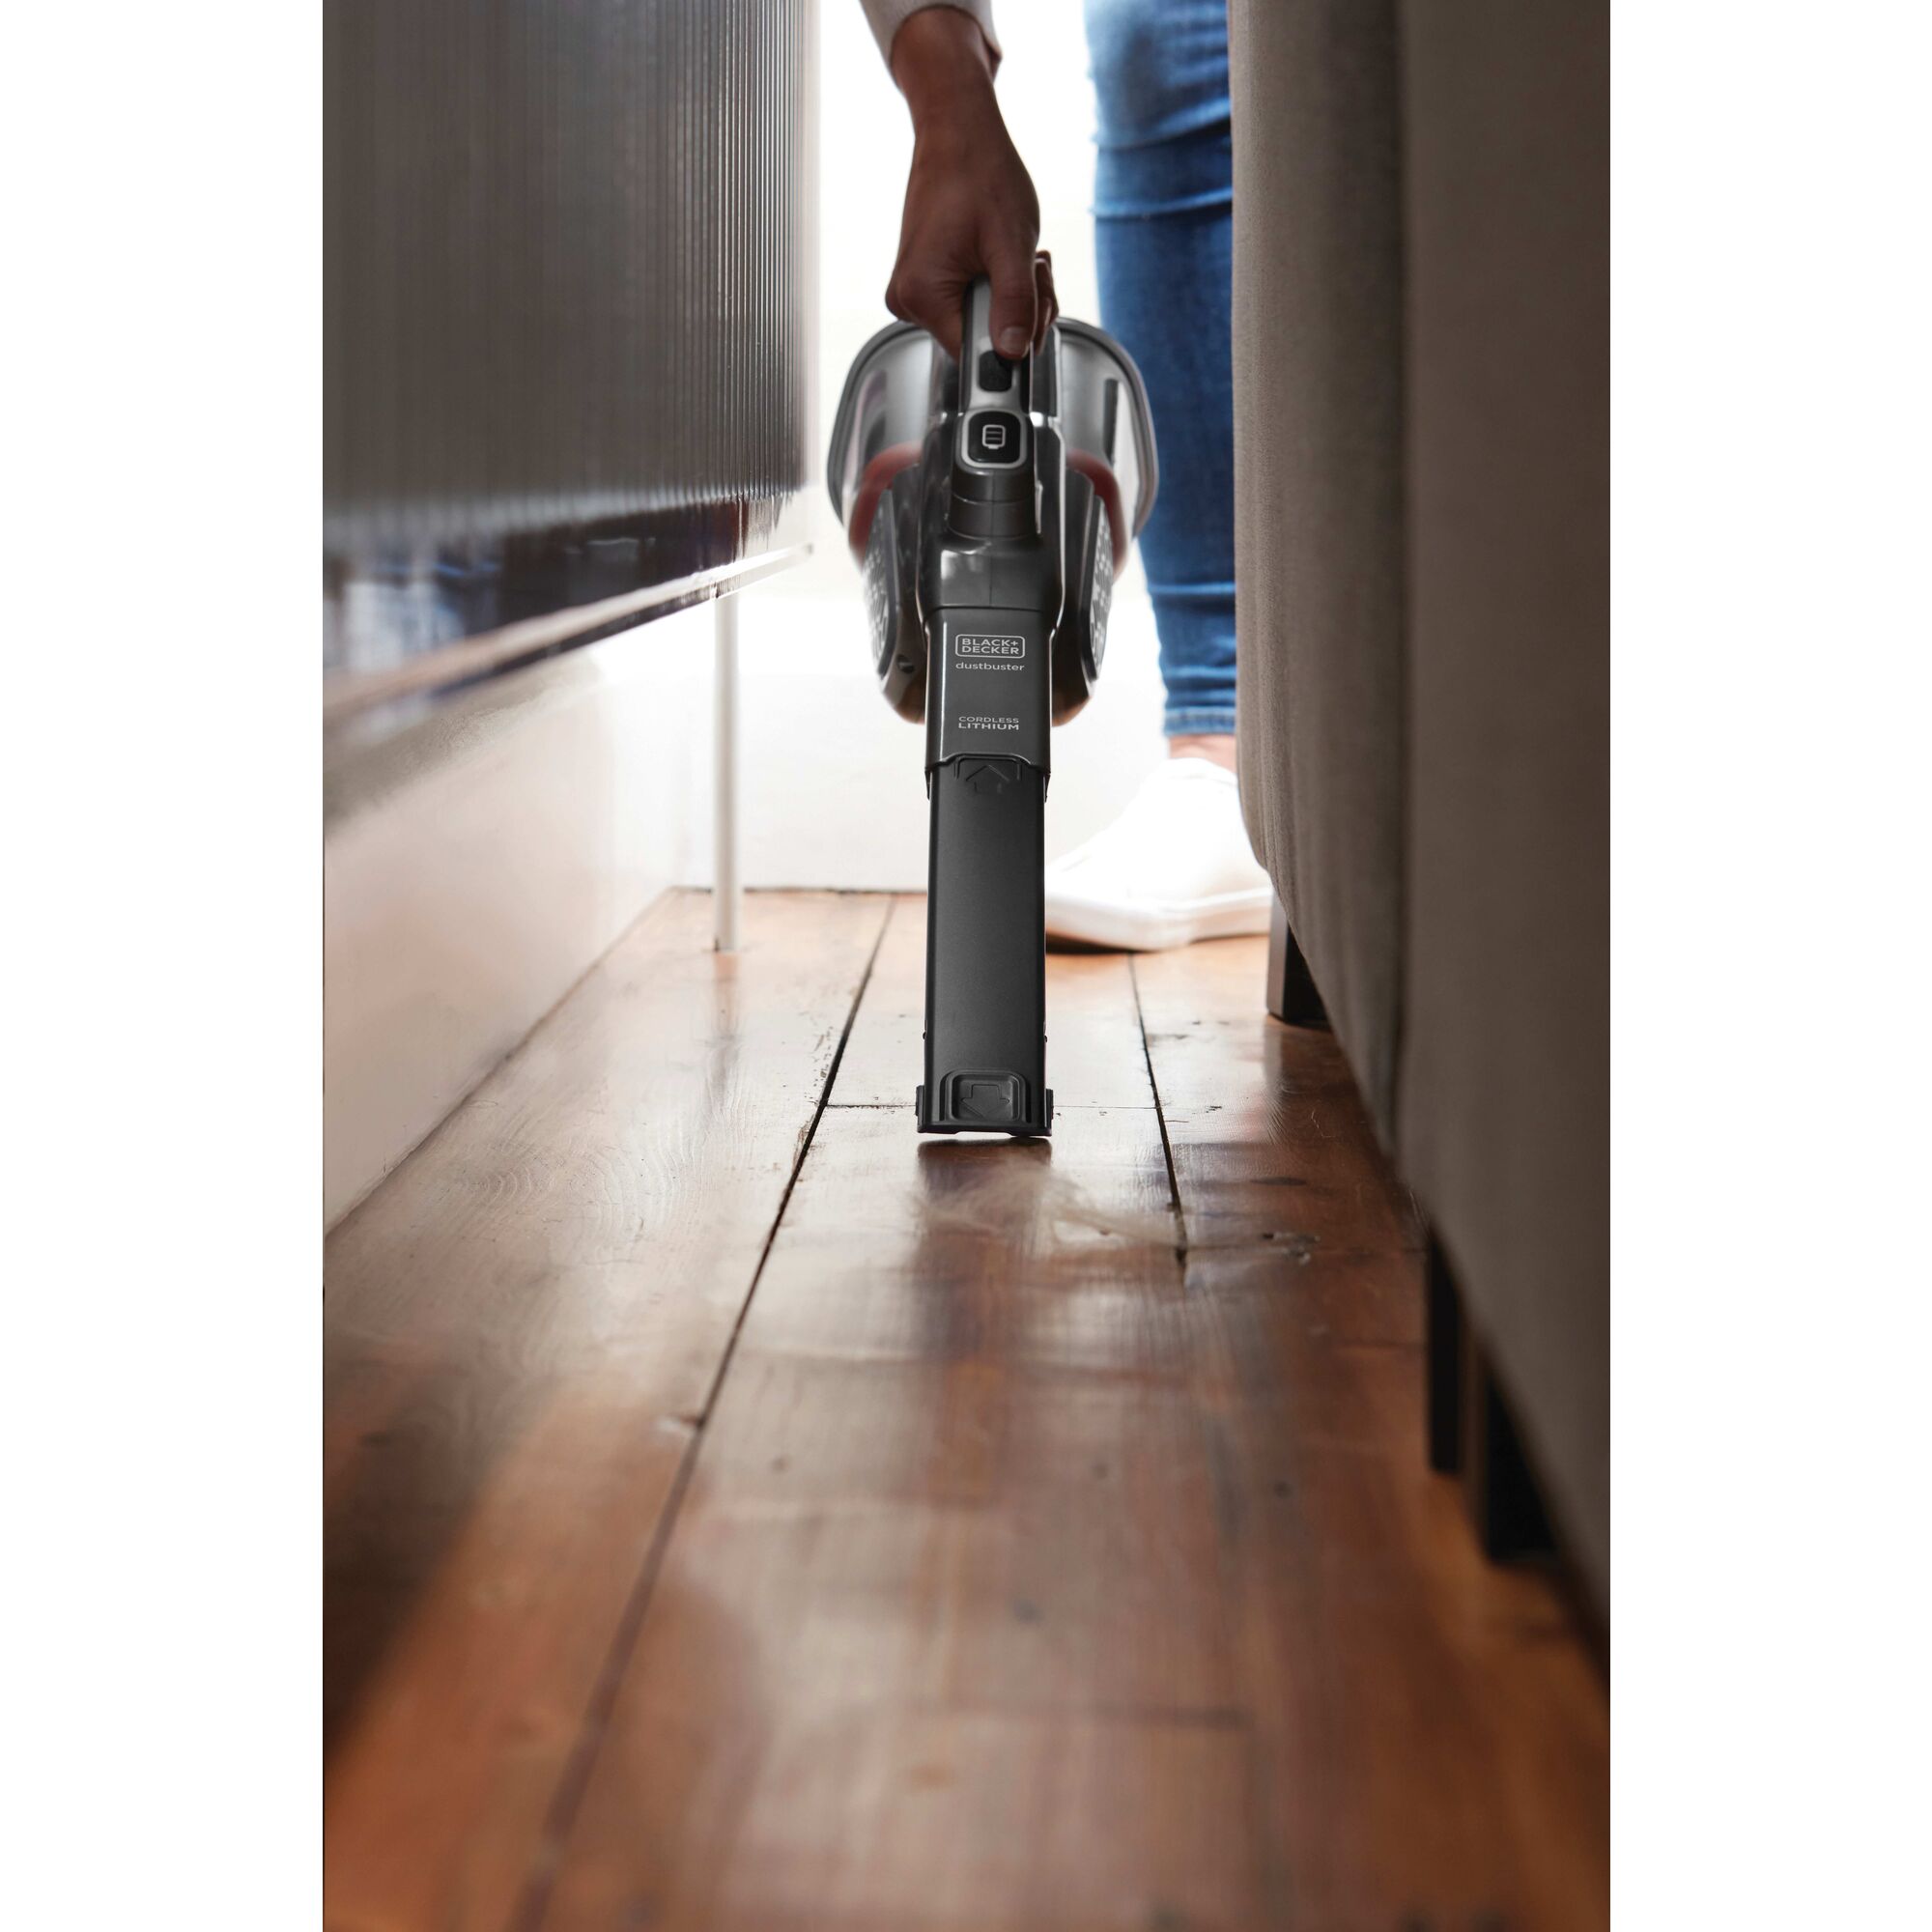 12 Volt MAX Dust buster Advanced Clean + Cordless Hand Vacuum with Powered Pet Head being used to clean behind the sofa.